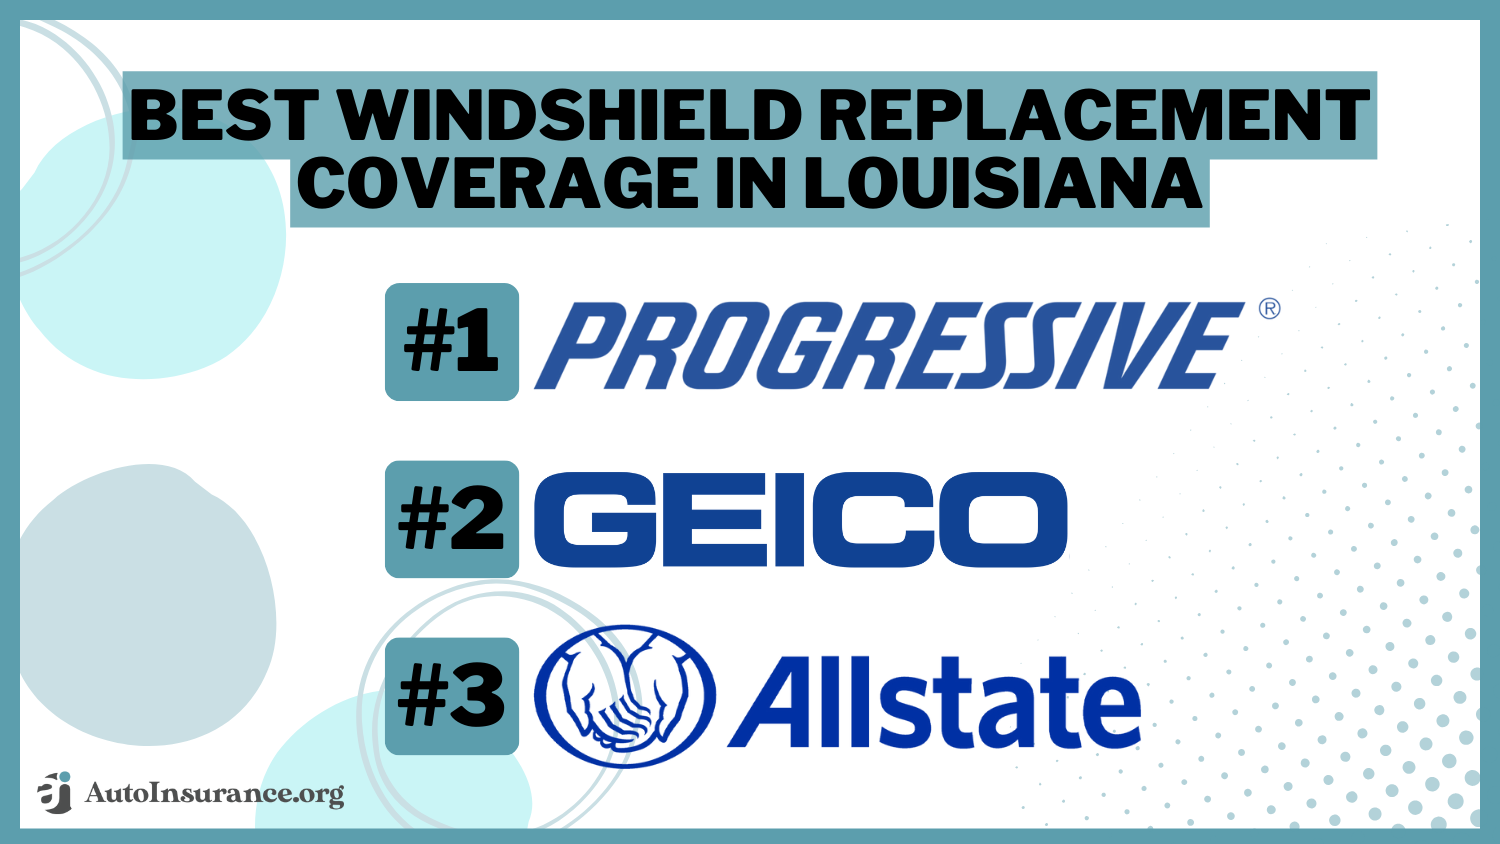 Best Windshield Replacement Coverage in Louisiana: Progressive, Geico, and Allstate